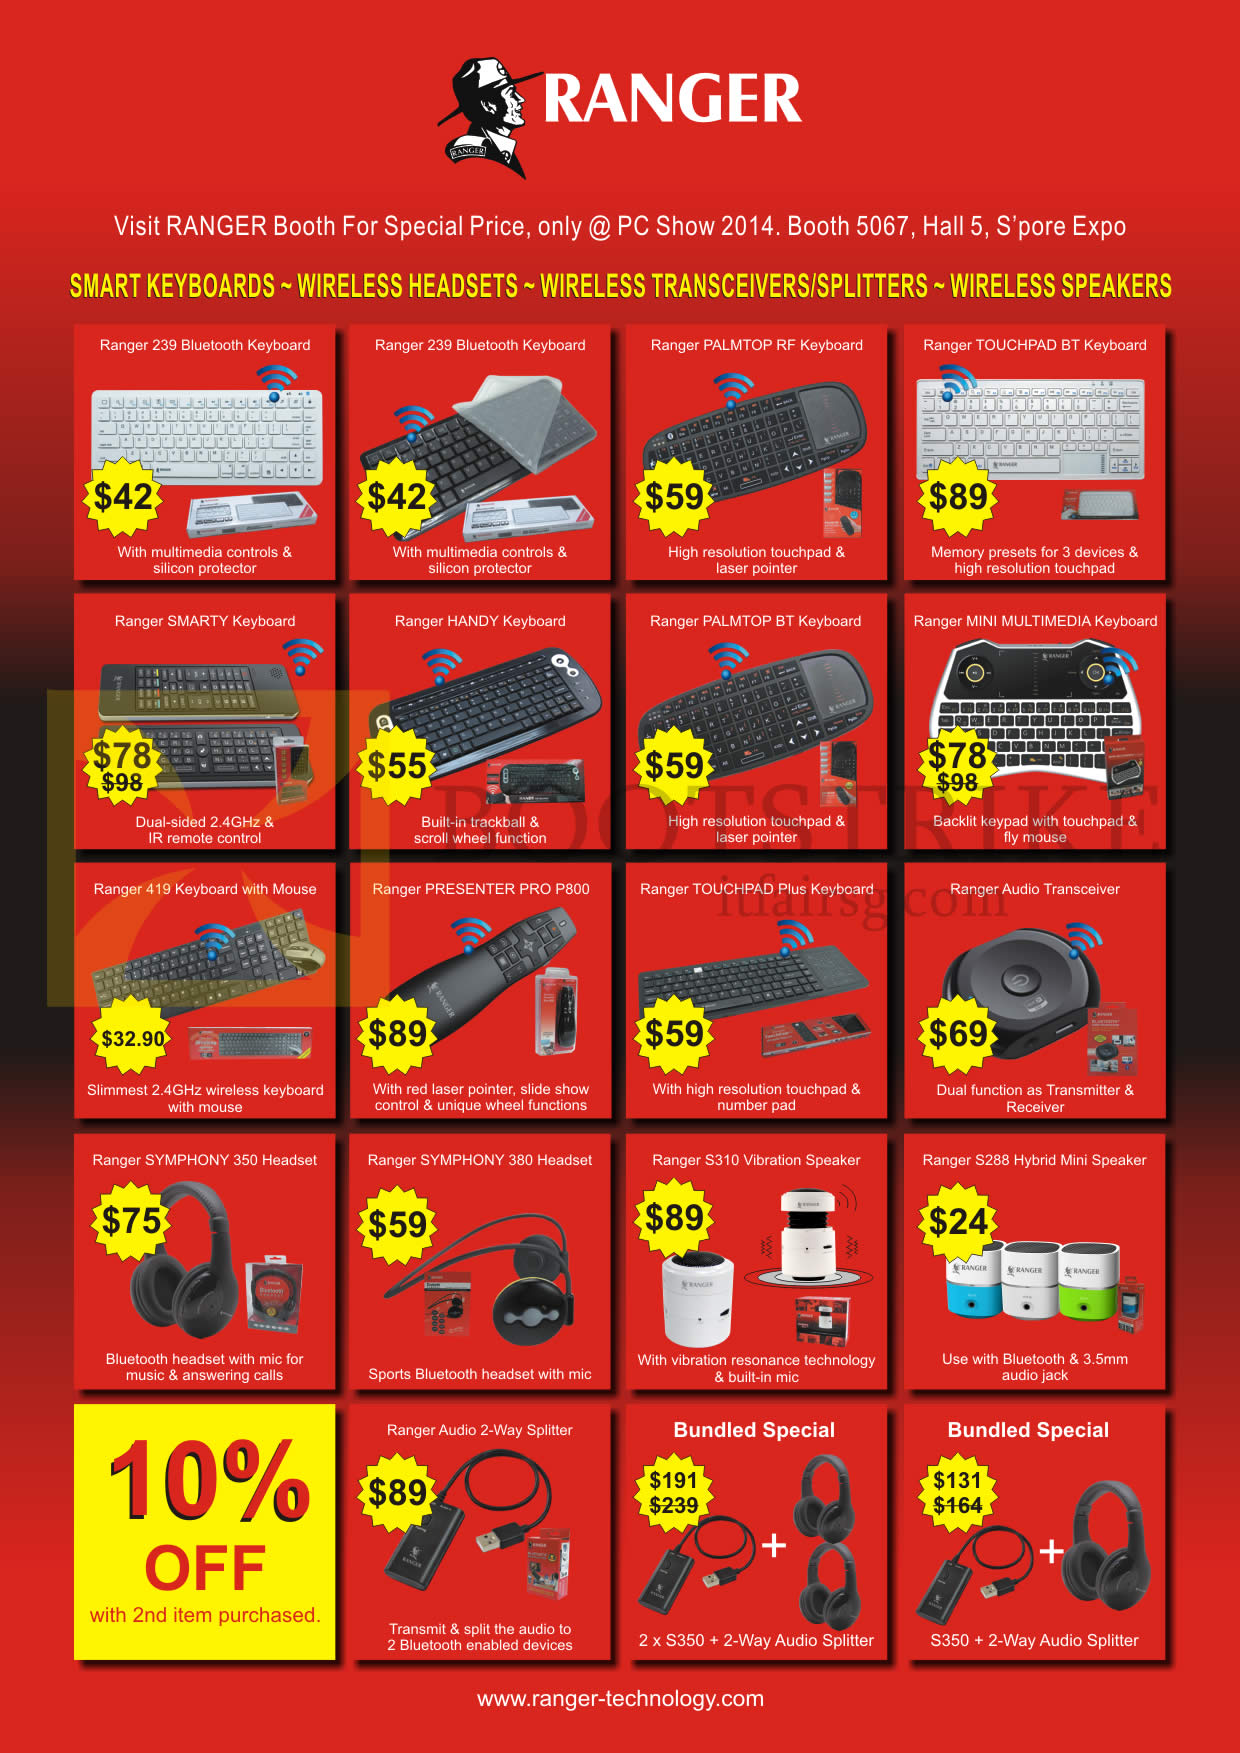 PC SHOW 2014 price list image brochure of Systems Tech Ranger Keyboards, Wireless Headsets, Transceivers, Splitters, Speakers